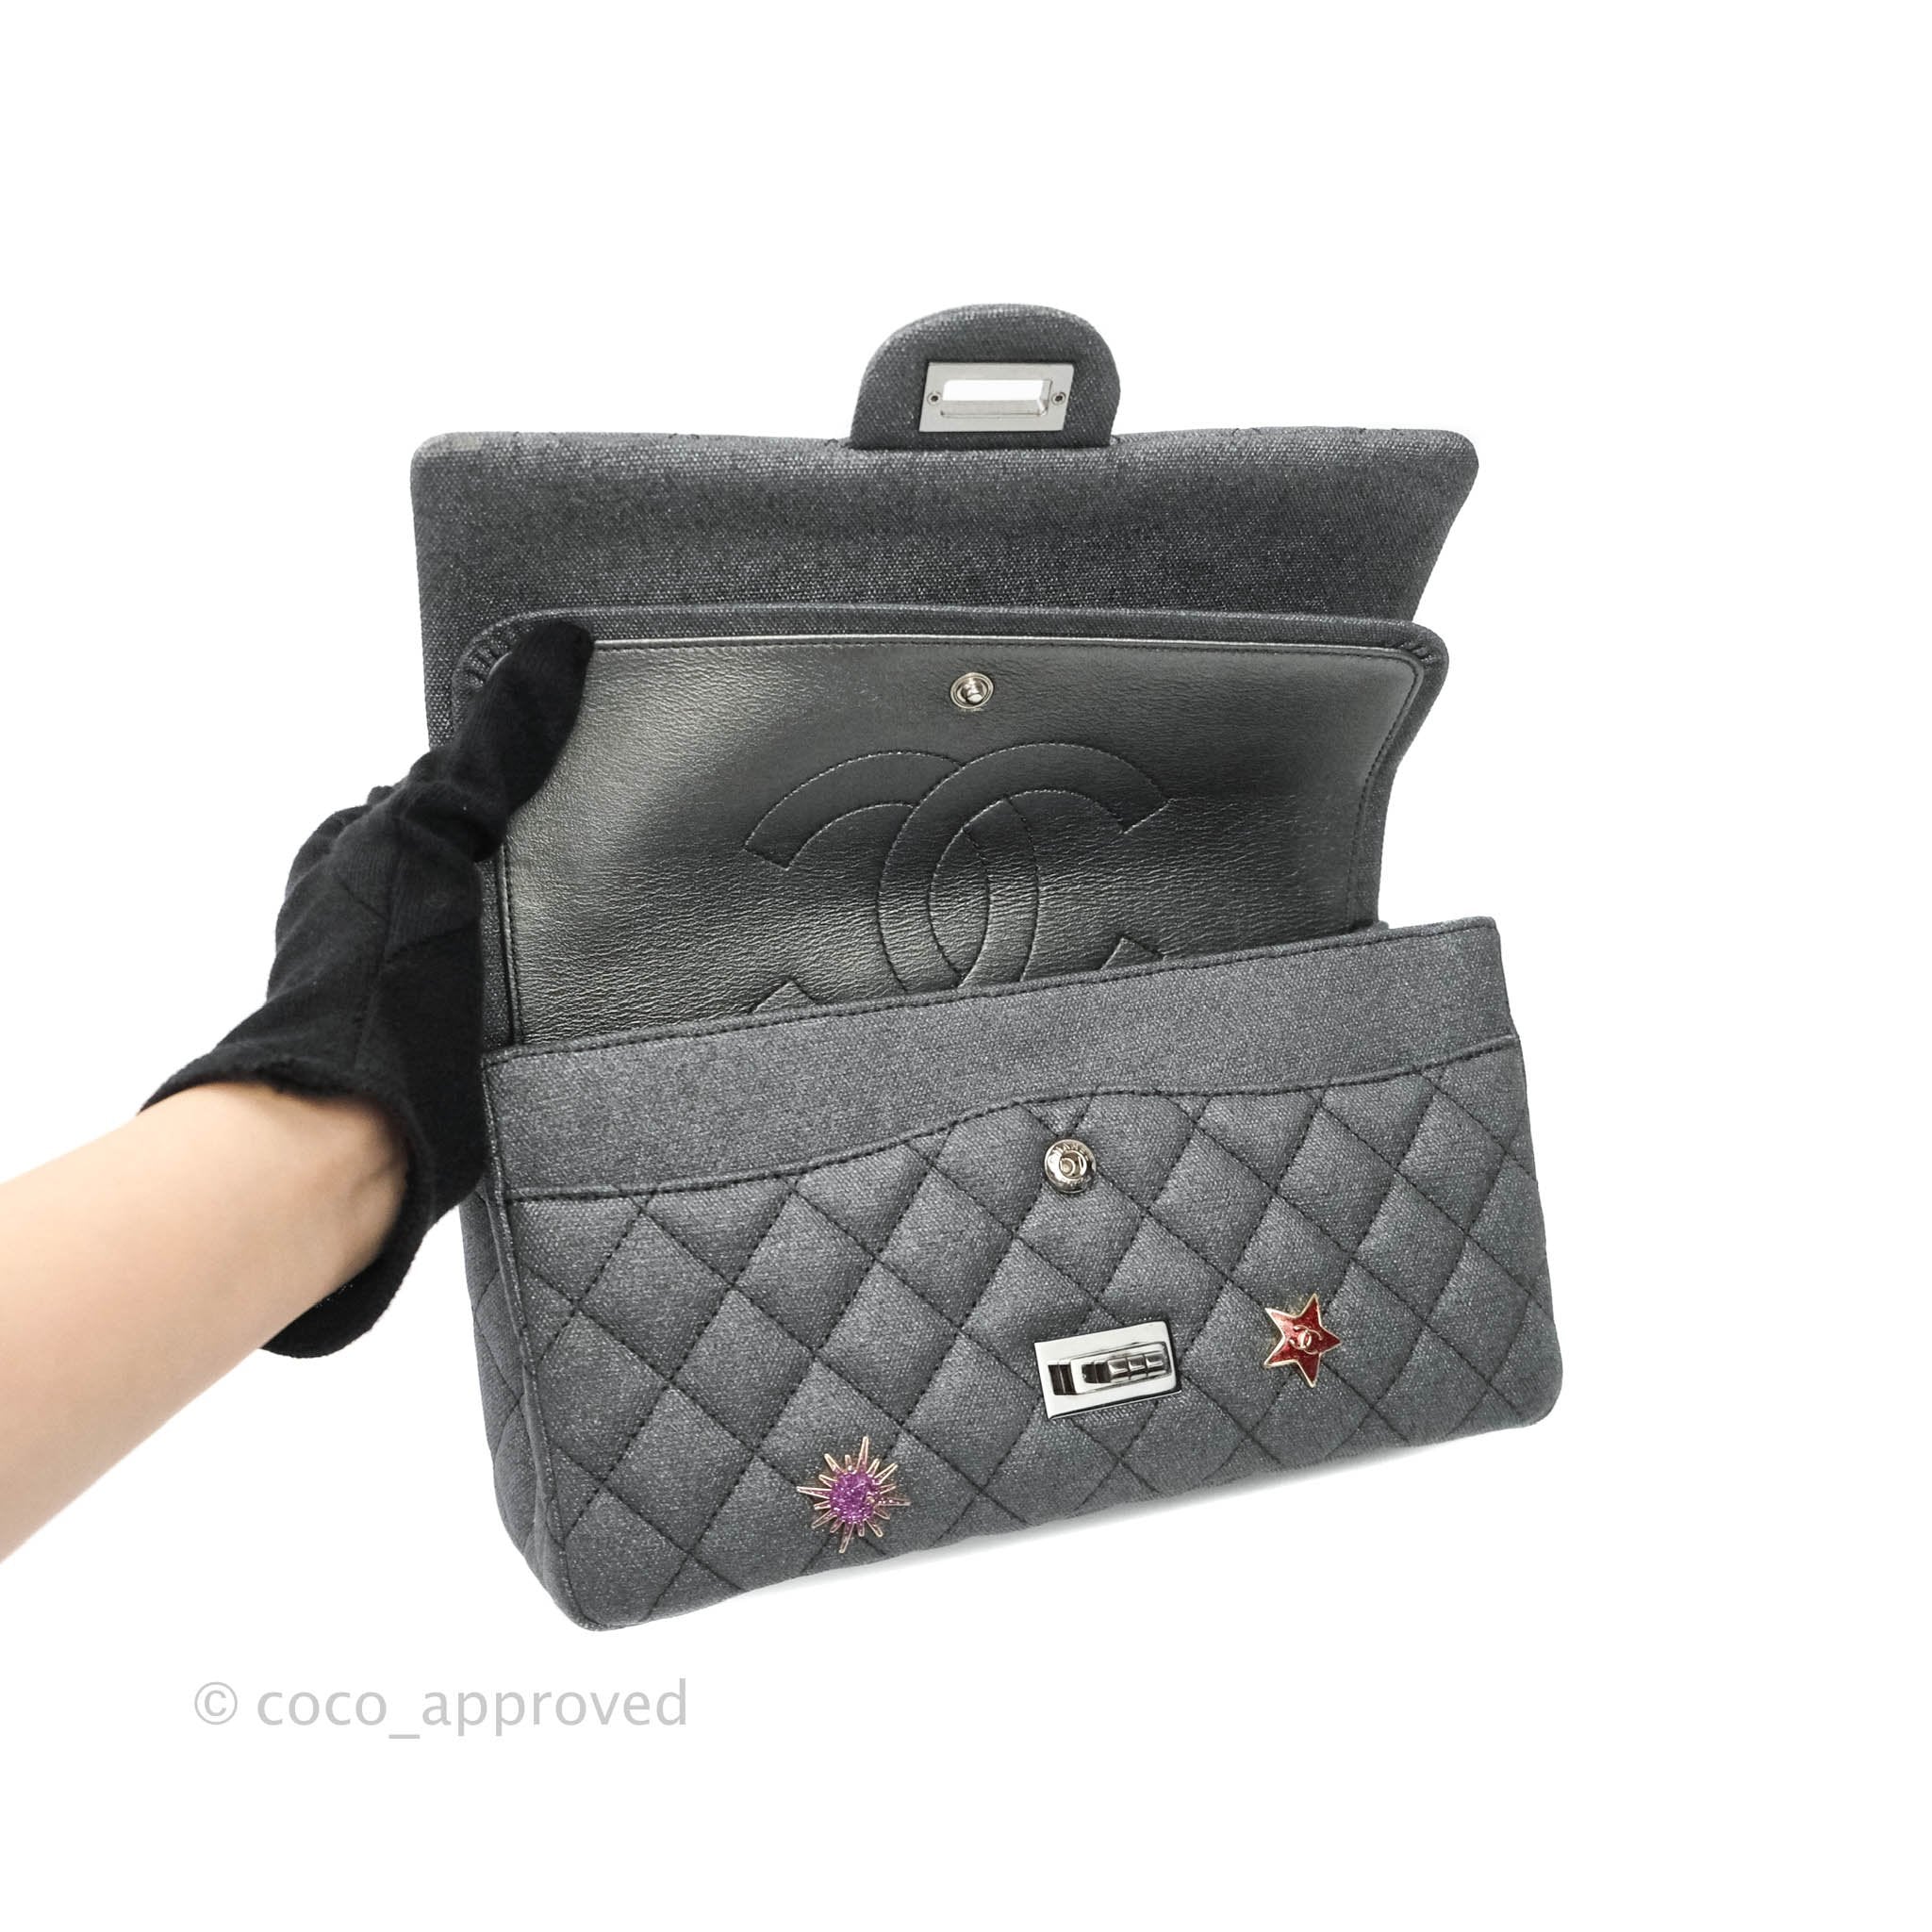 Chanel Pink, Green, and Navy Tweed 2.55 Reissue Flap 225 Silver Hardware, 2017-2018 (Very Good), Blue/Pink/Green Womens Handbag